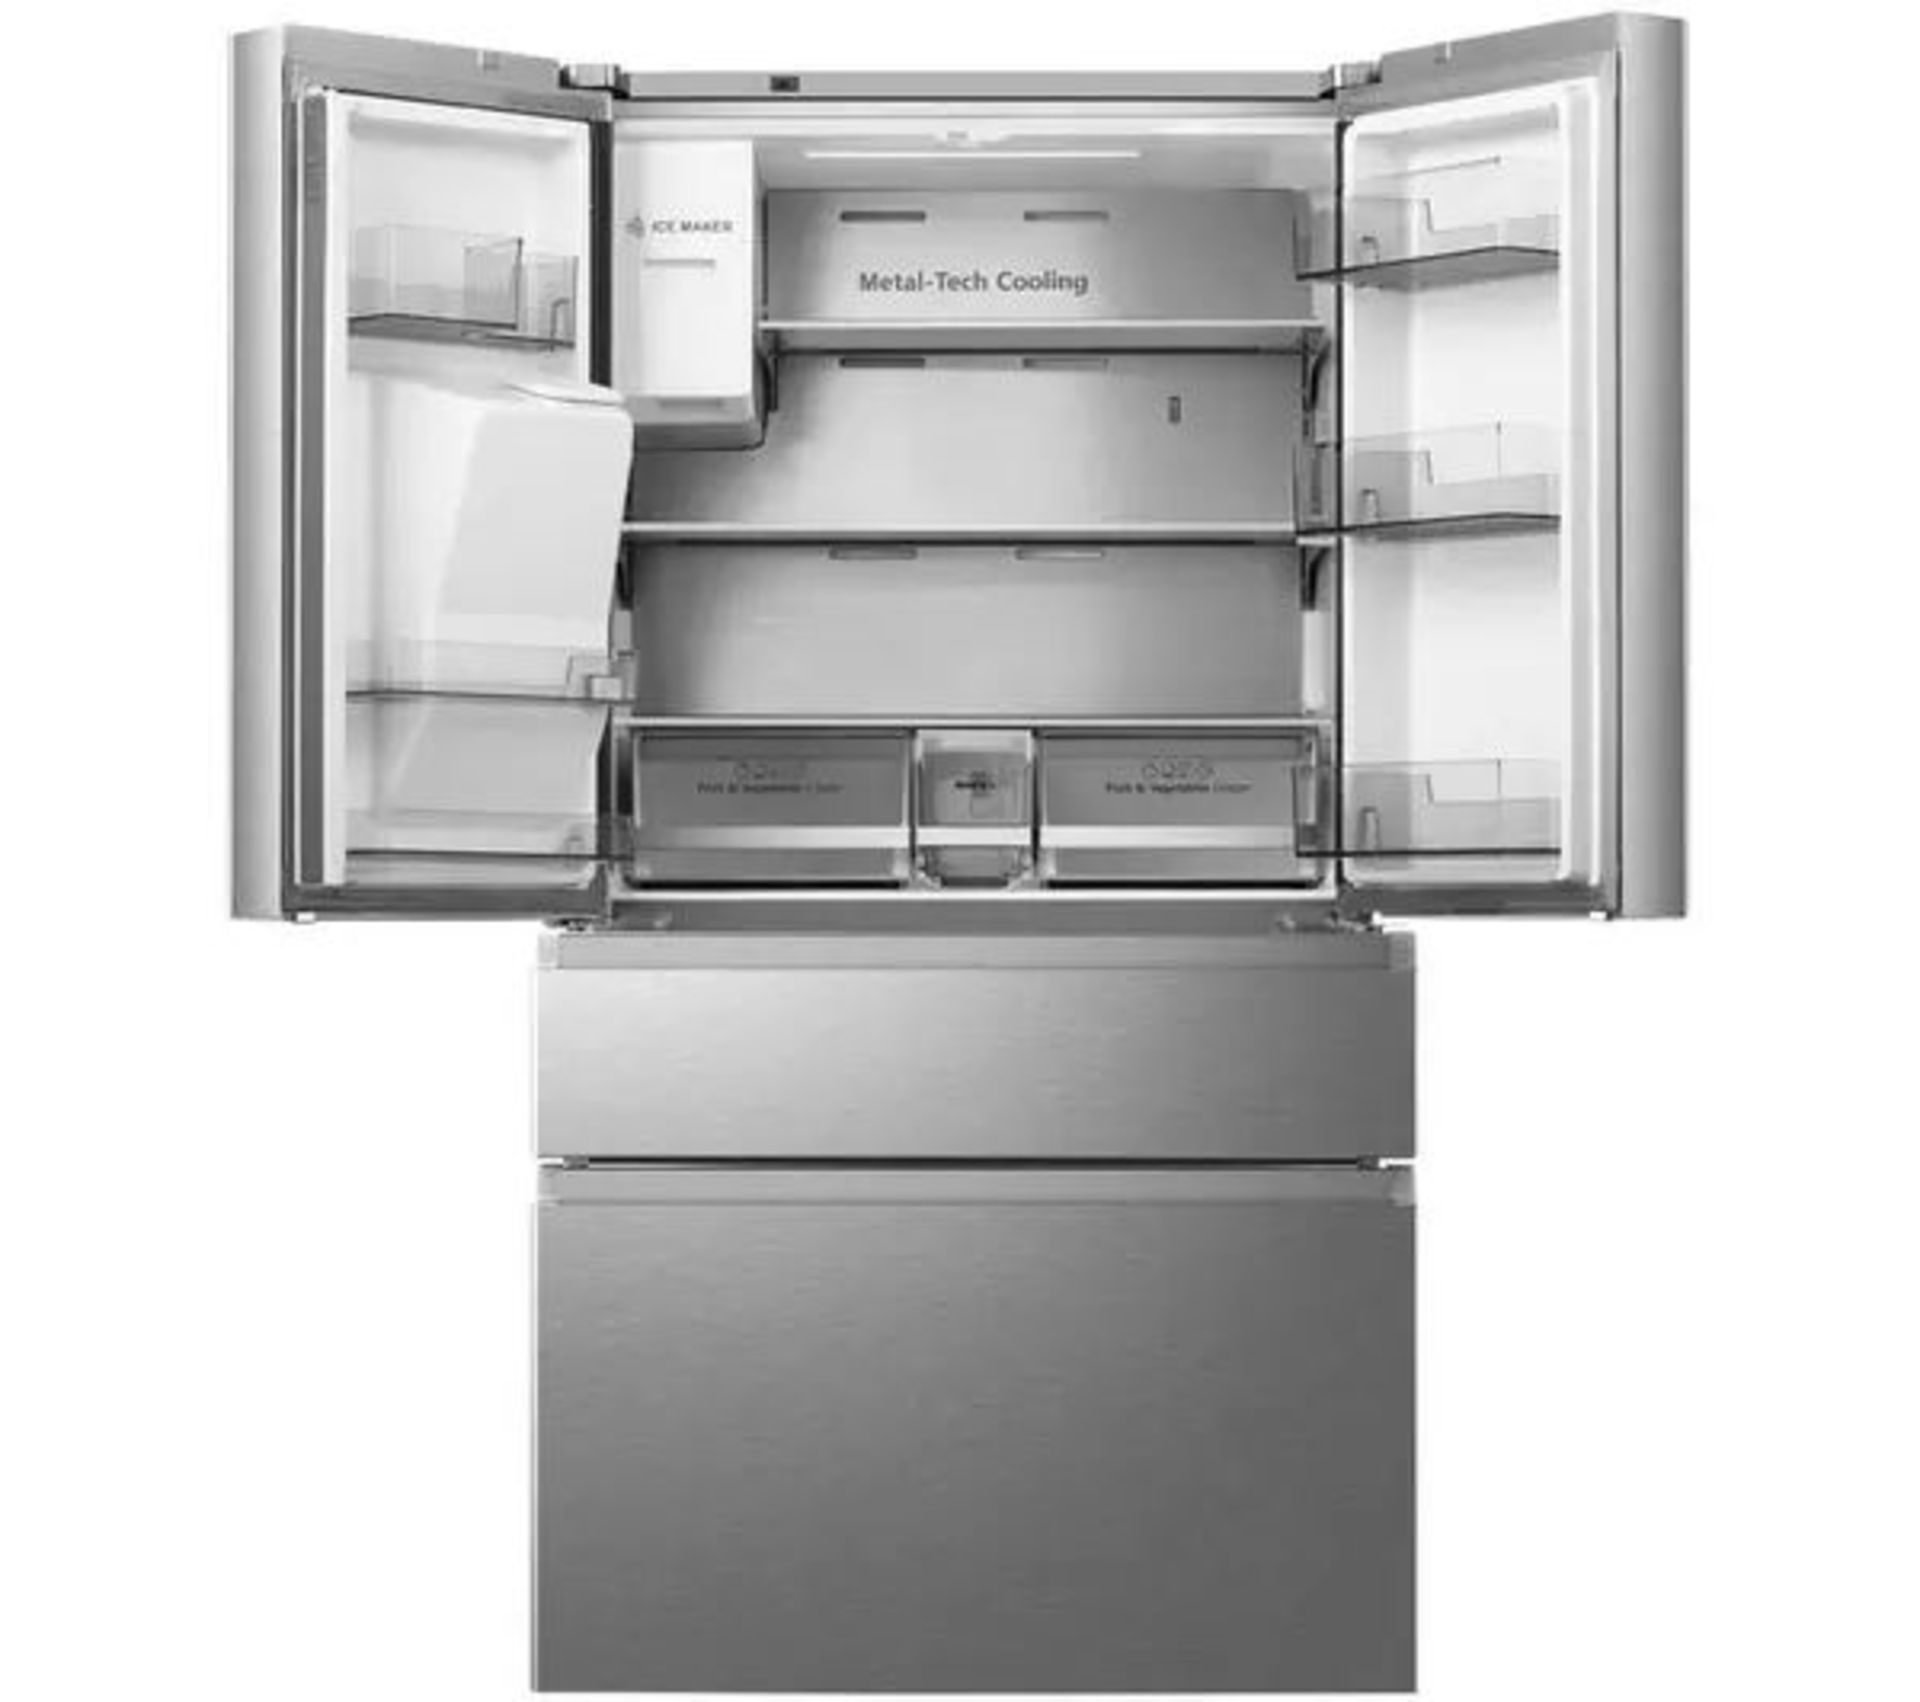 HISENSE RF728N4AIF Fridge Freezer - Stainless Steel. - RRP £1,619.00. There's a section that you can - Image 3 of 3